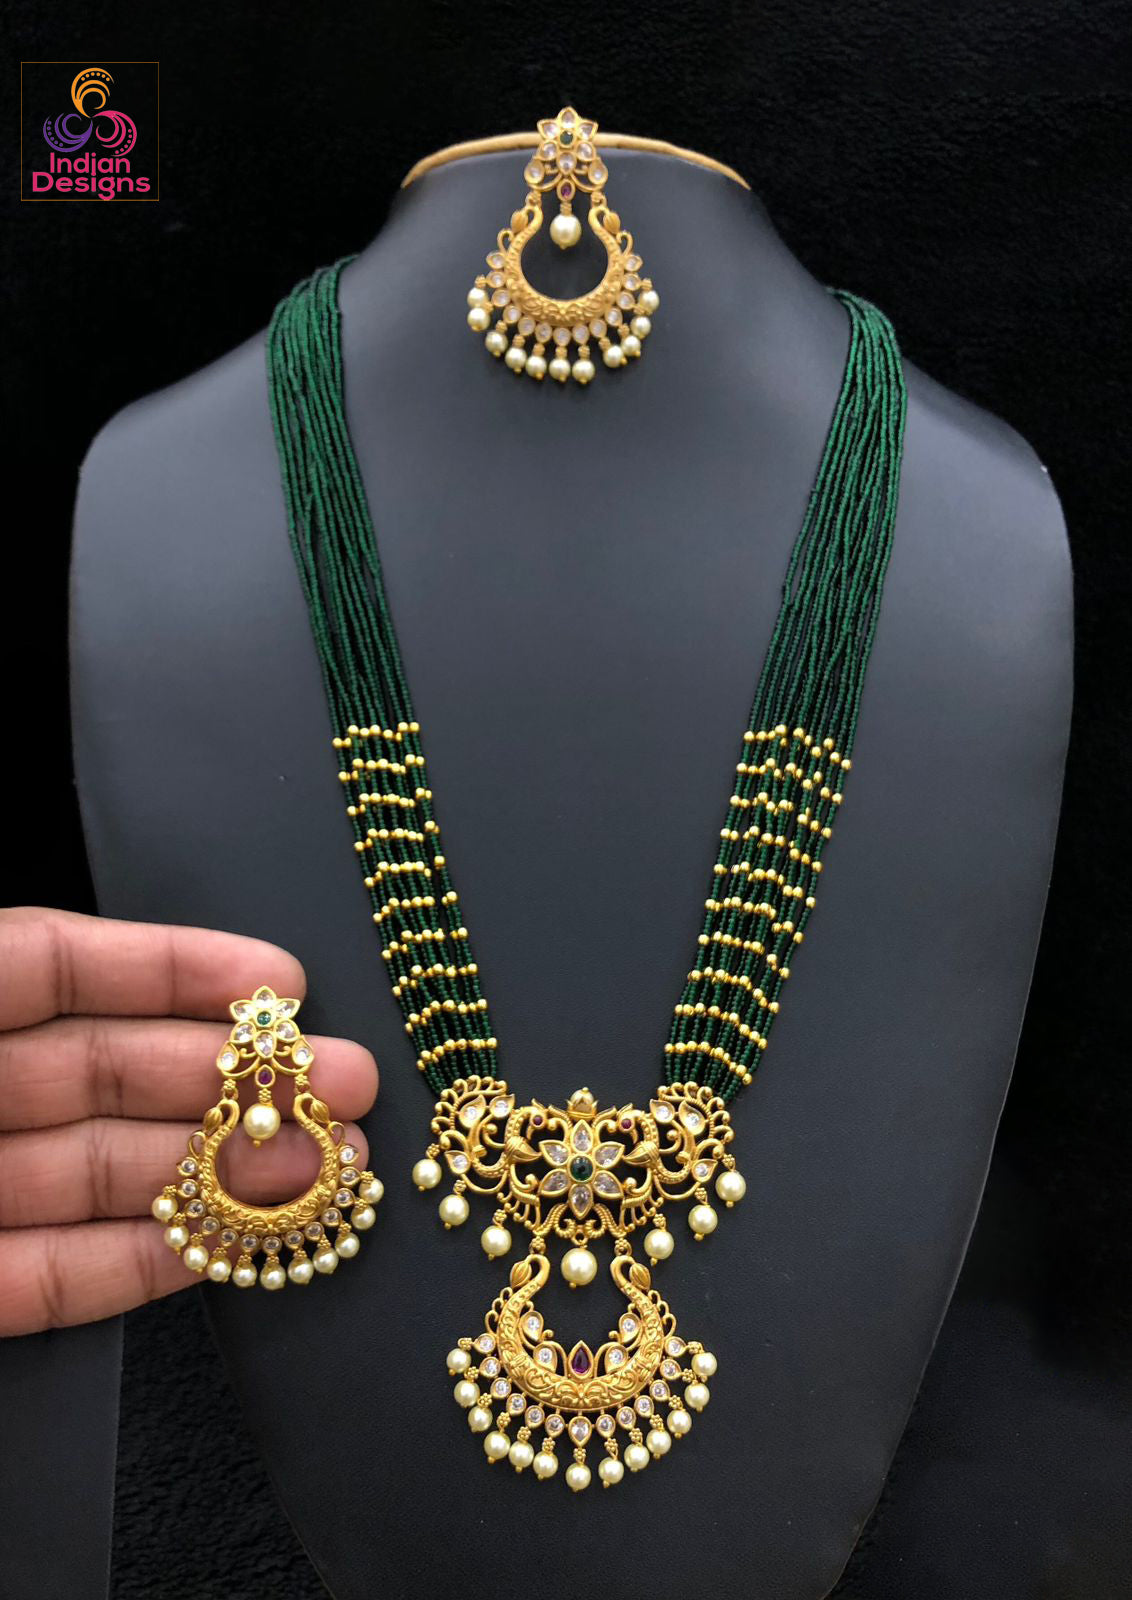 Buy Black Beads Mangalsutra - Shop Now!